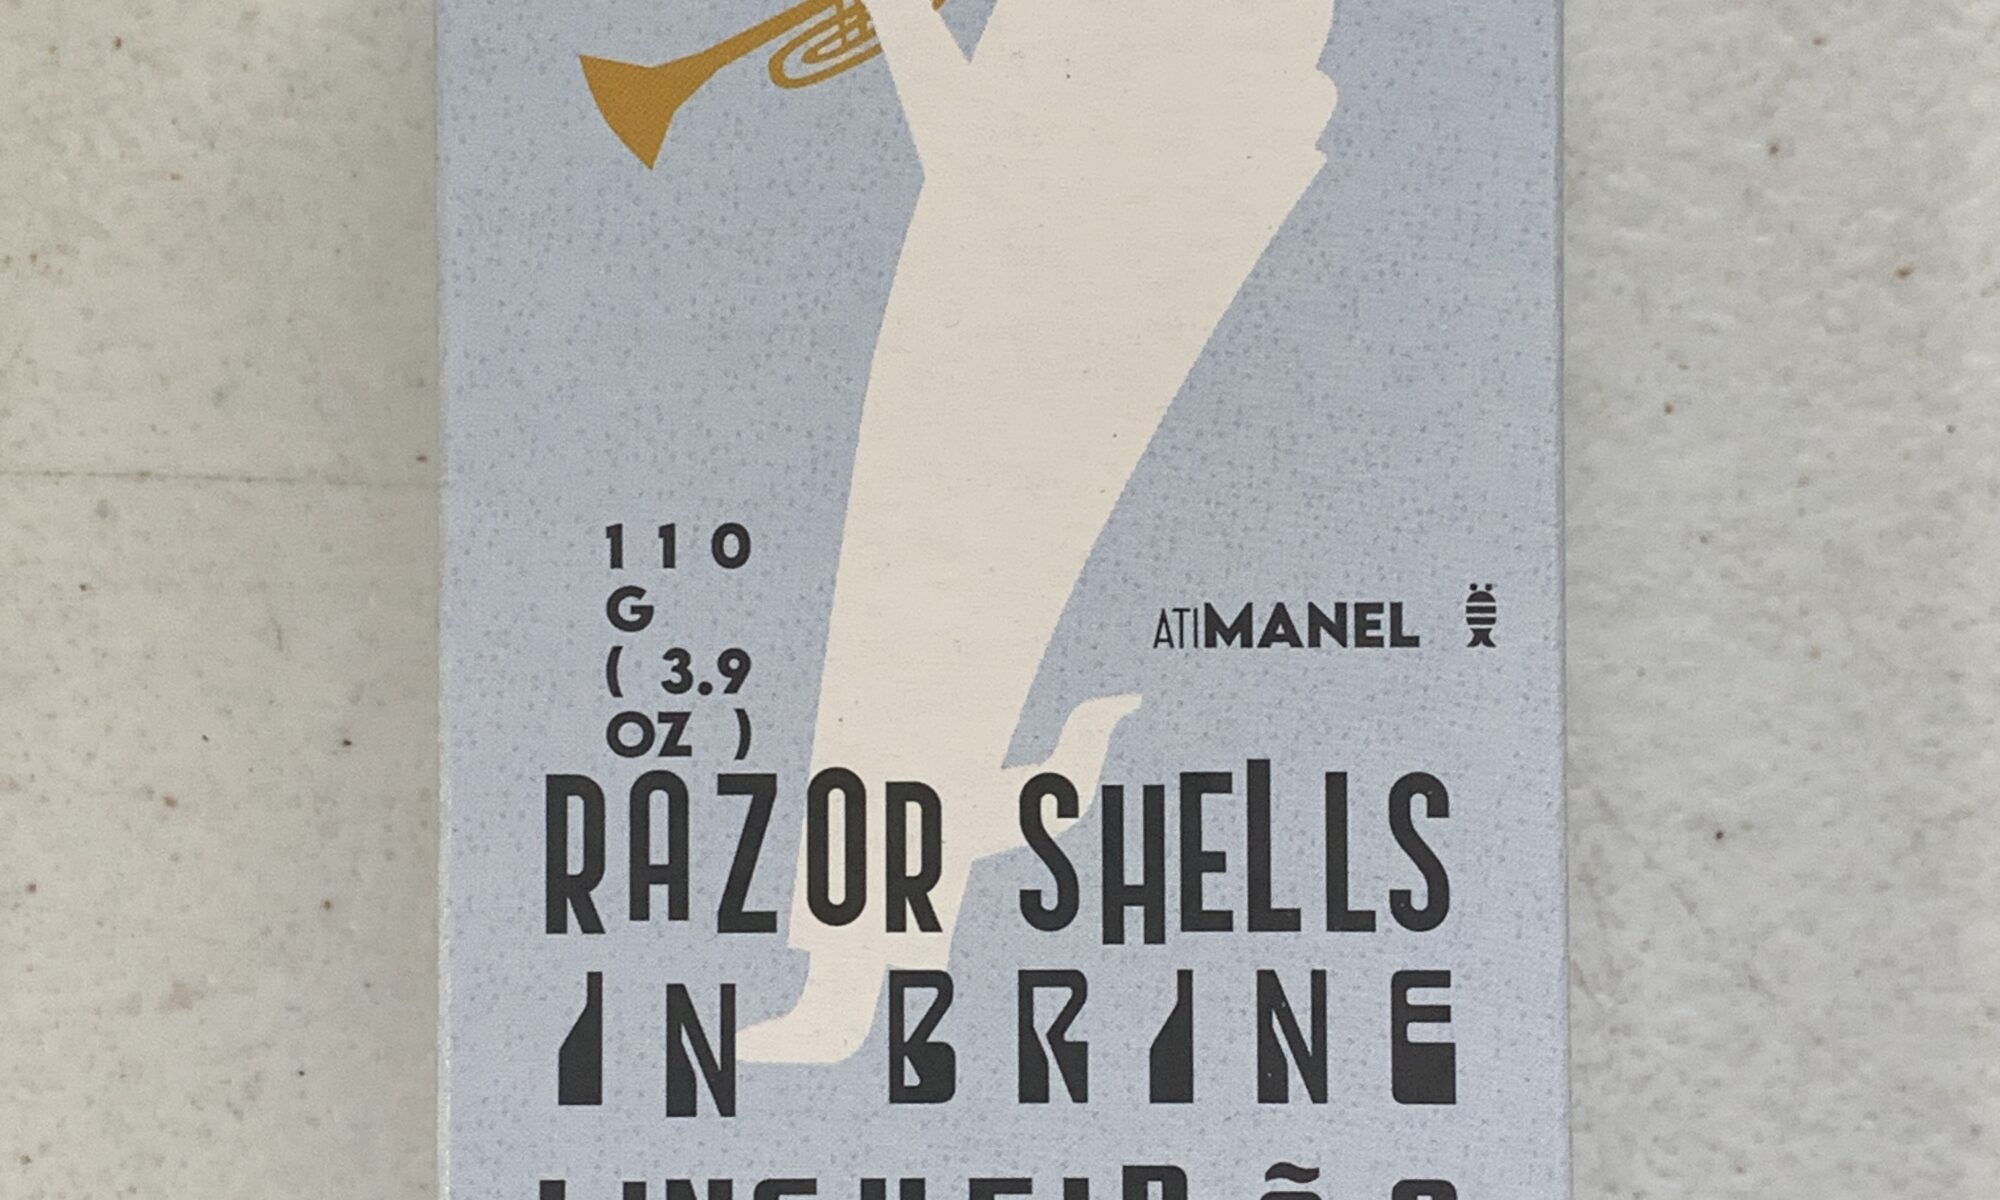 Image of the front of a package of Ati Manel Razor Clams in Brine